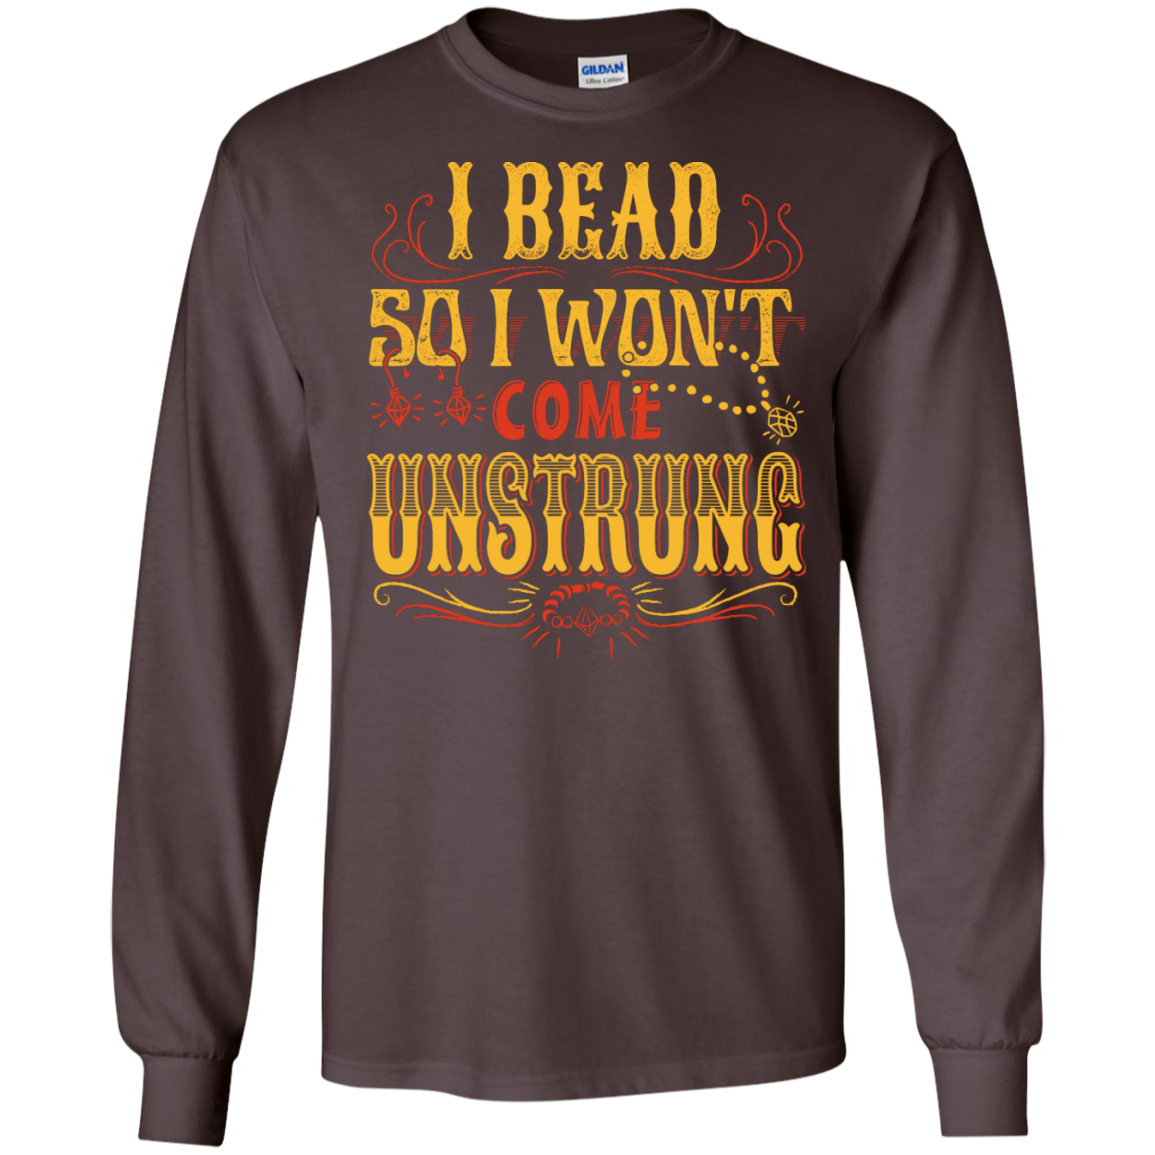 I Bead So I Won't Come Unstrung (gold) Long Sleeve Ultra Cotton T-Shirt - Crafter4Life - 1